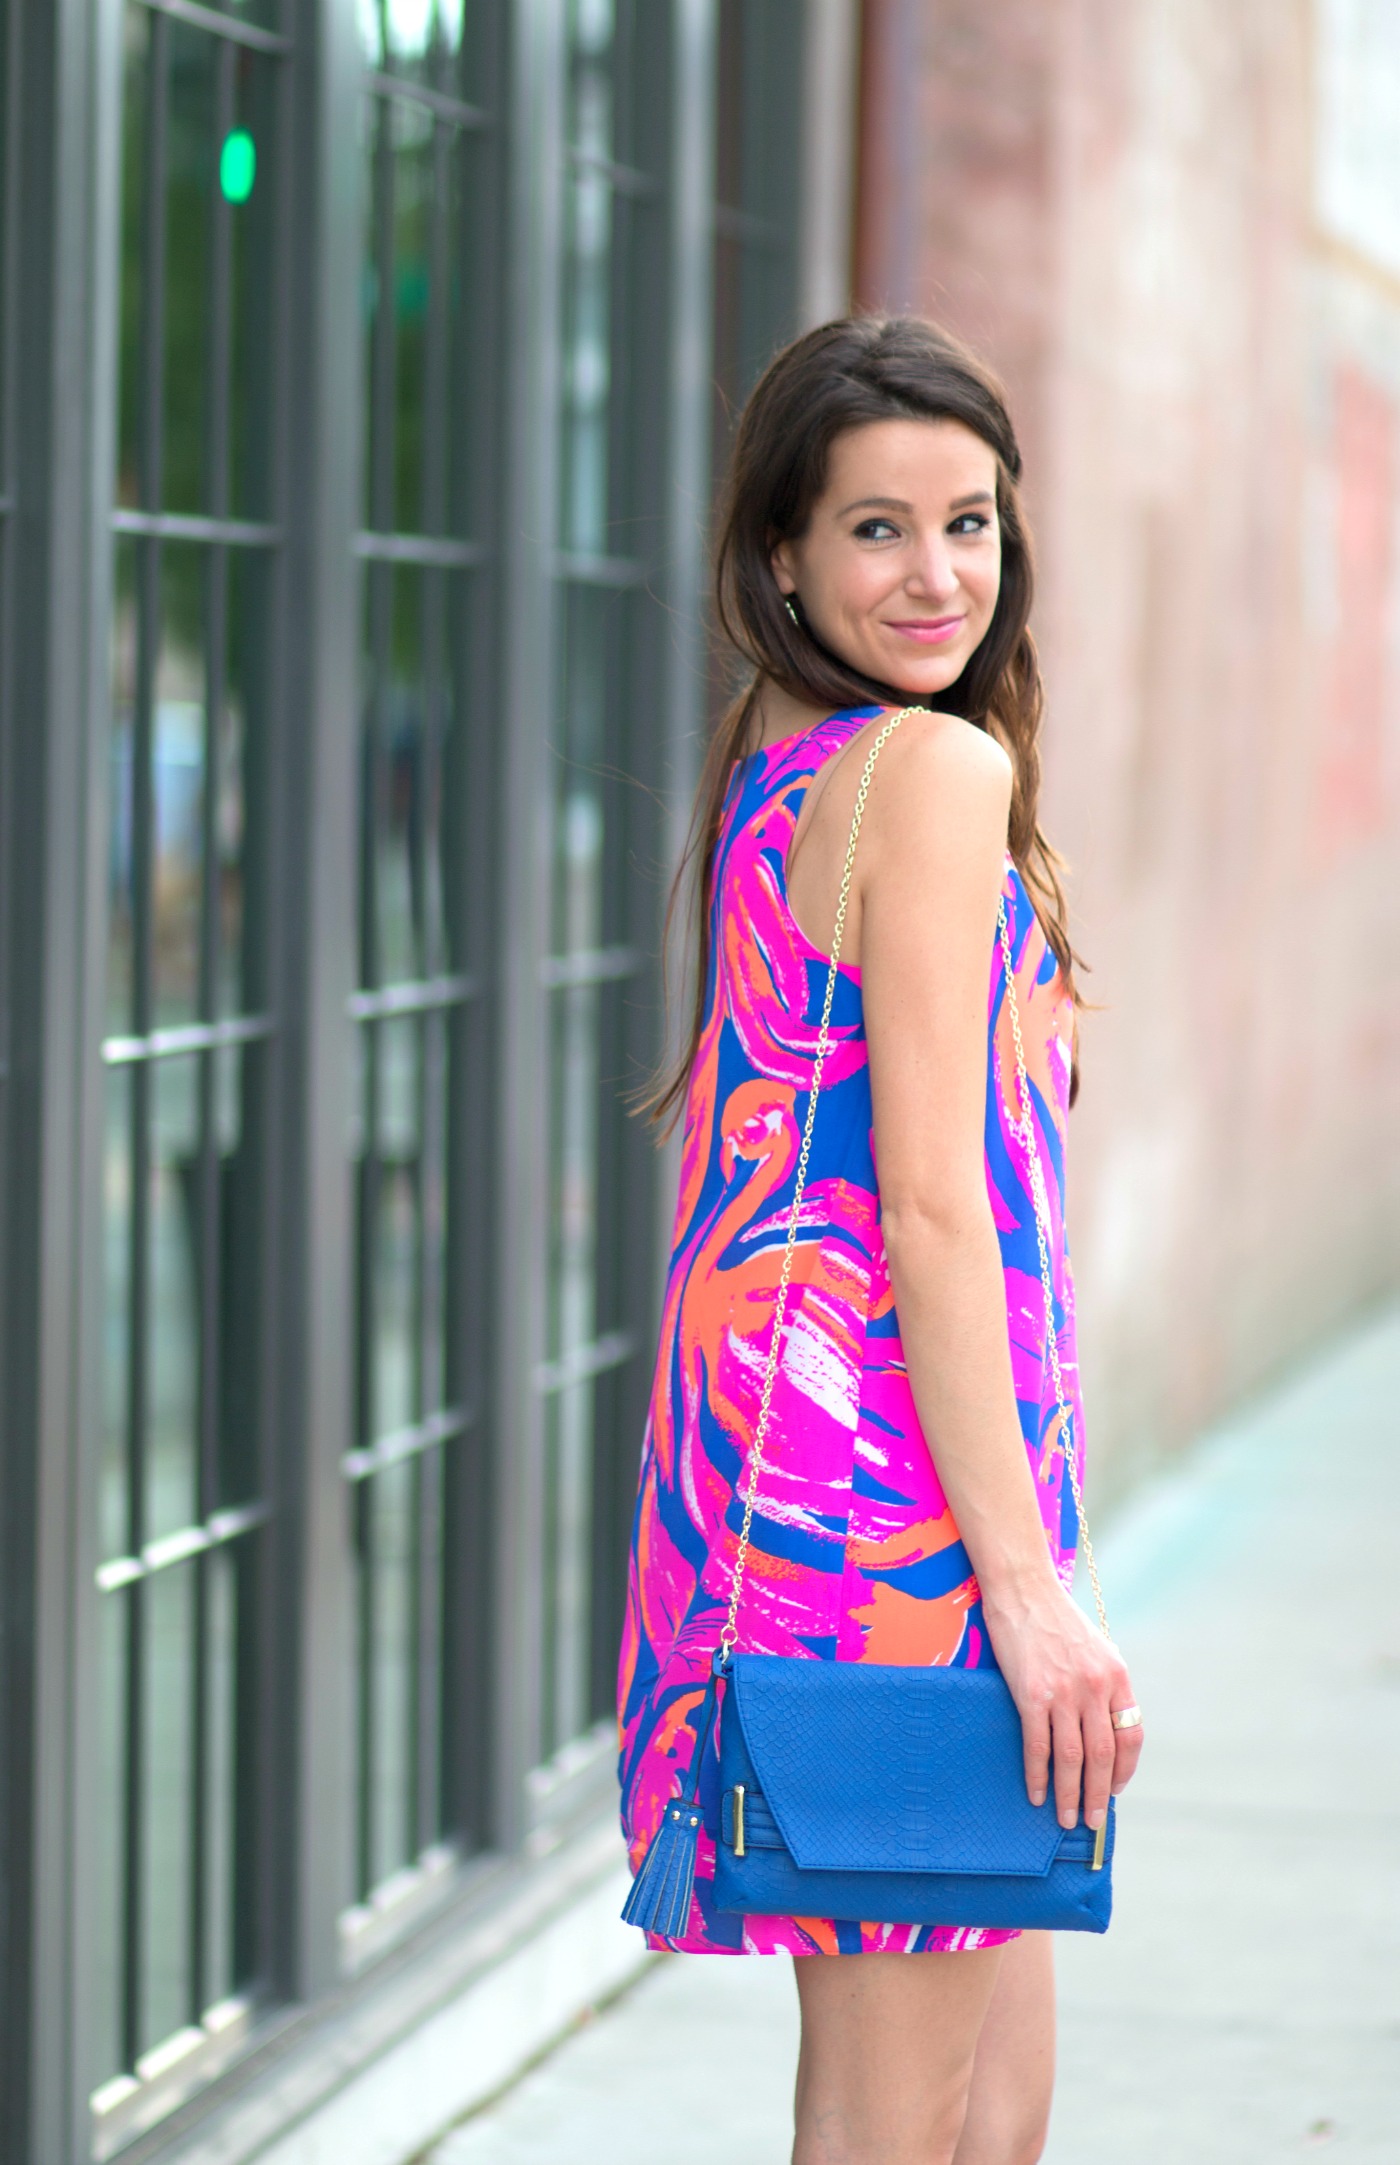 Top 10 Lilly Pulitzer Outfits of All Time by southern fashion blogger Stephanie Ziajka from Diary of a Debutante, Lilly Pulitzer Jackie Shift Dress, Lilly Pulitzer After Party Sale, Lilly Pulitzer After Party Sale September 2018